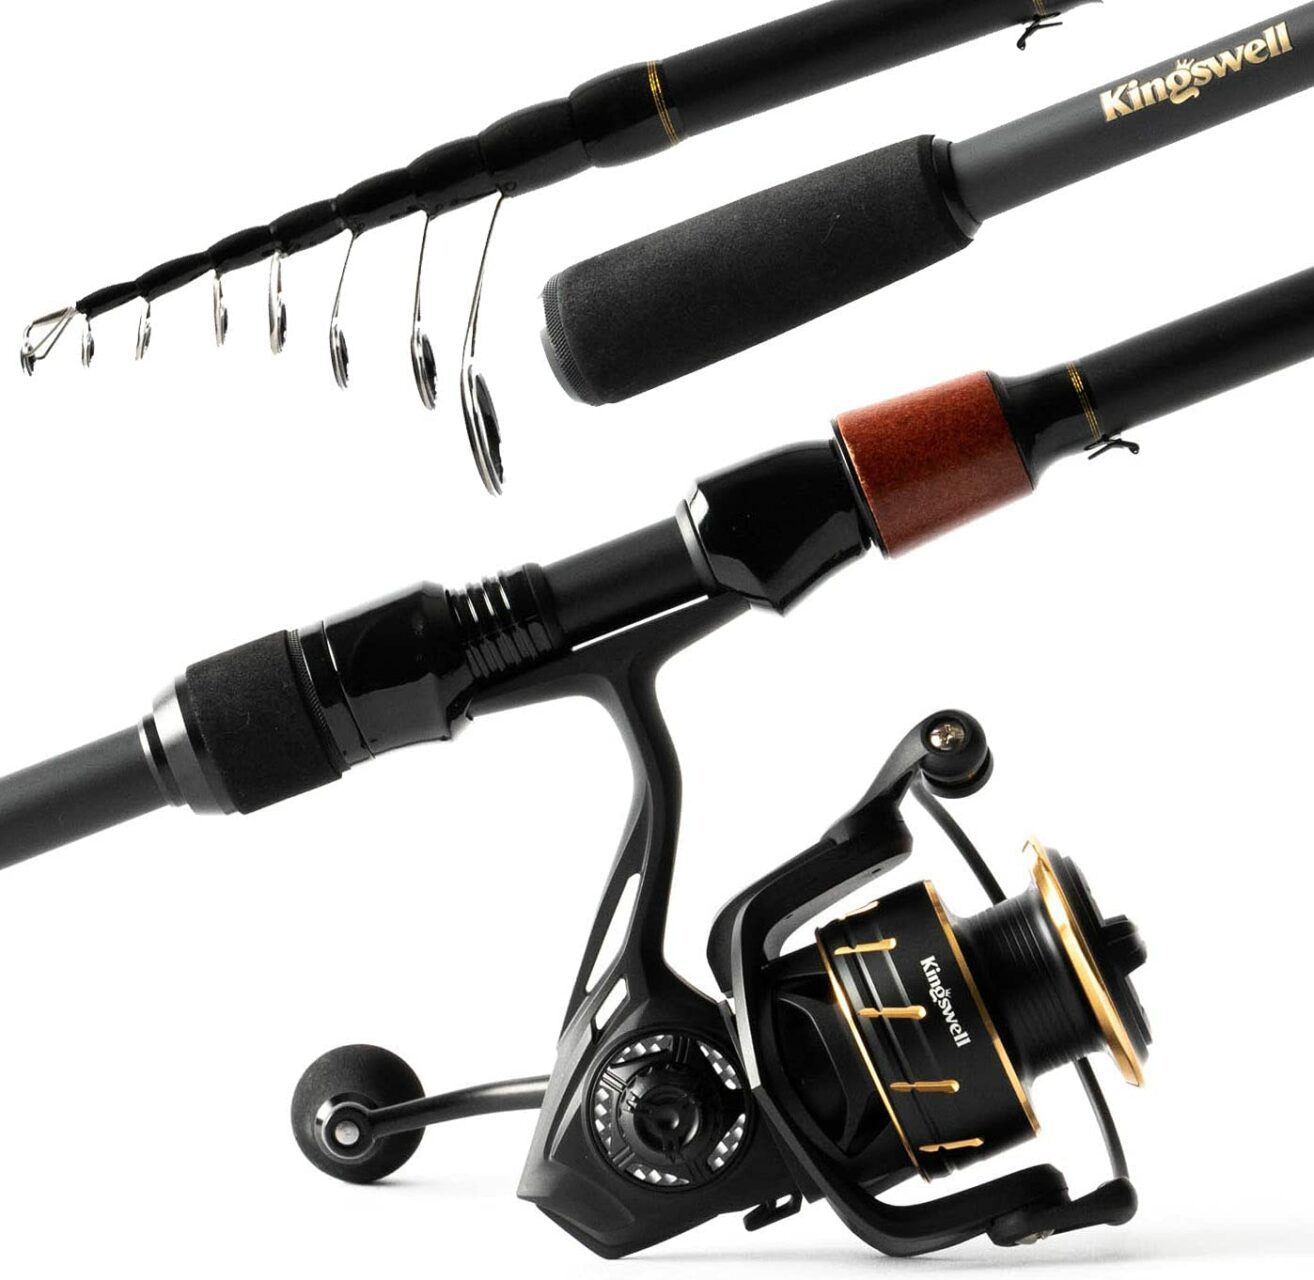 Best Collapsible Fishing Rod and Reel: KINGSWELL Telescopic Fishing Rod and Reel Combo